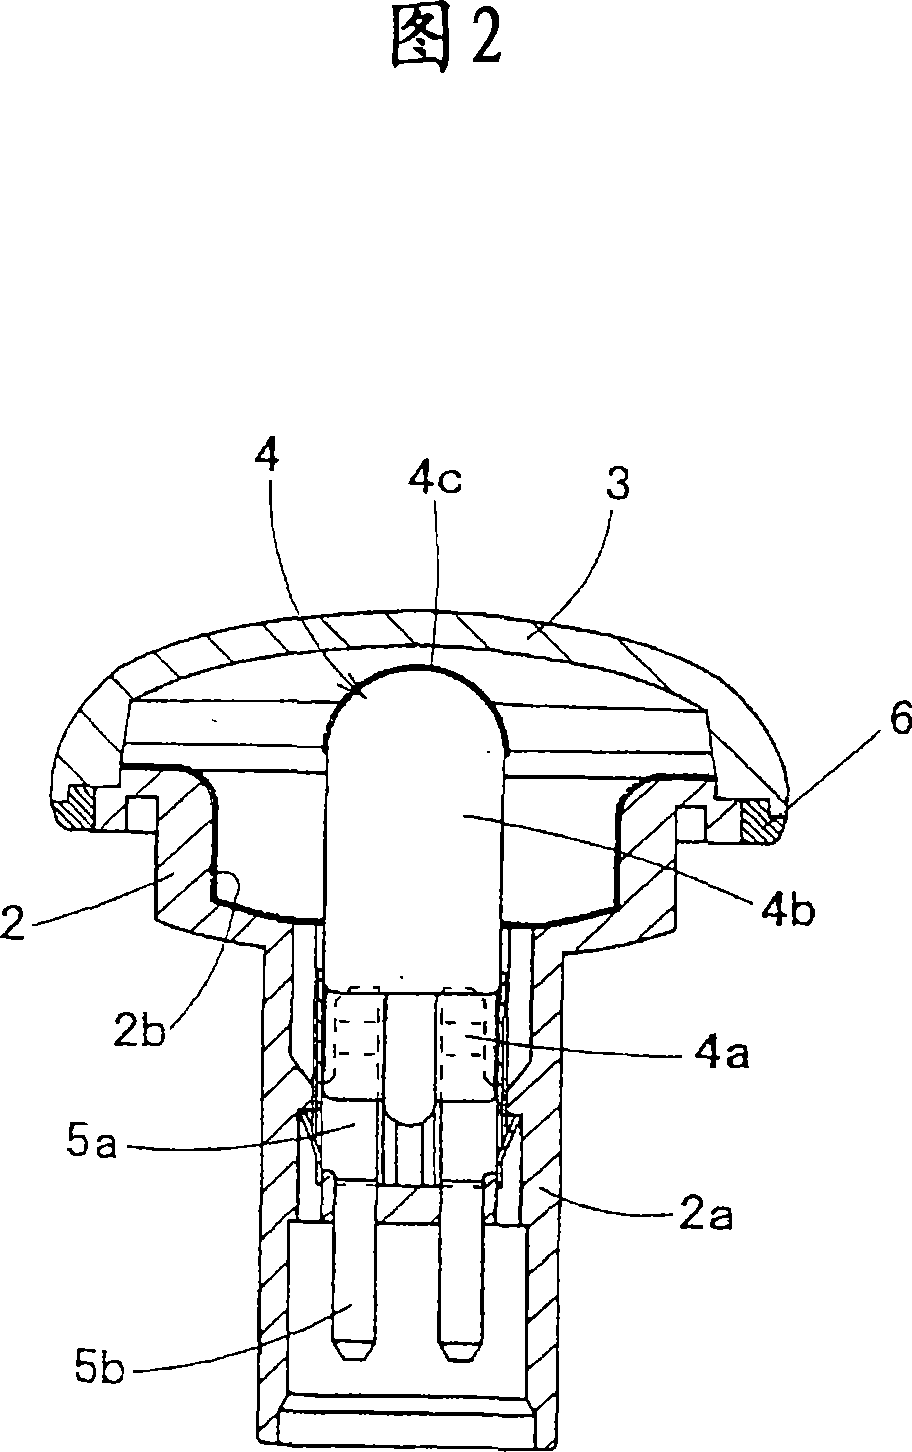 Deposition molded product, deposition molding method, and deposition molding apparatus